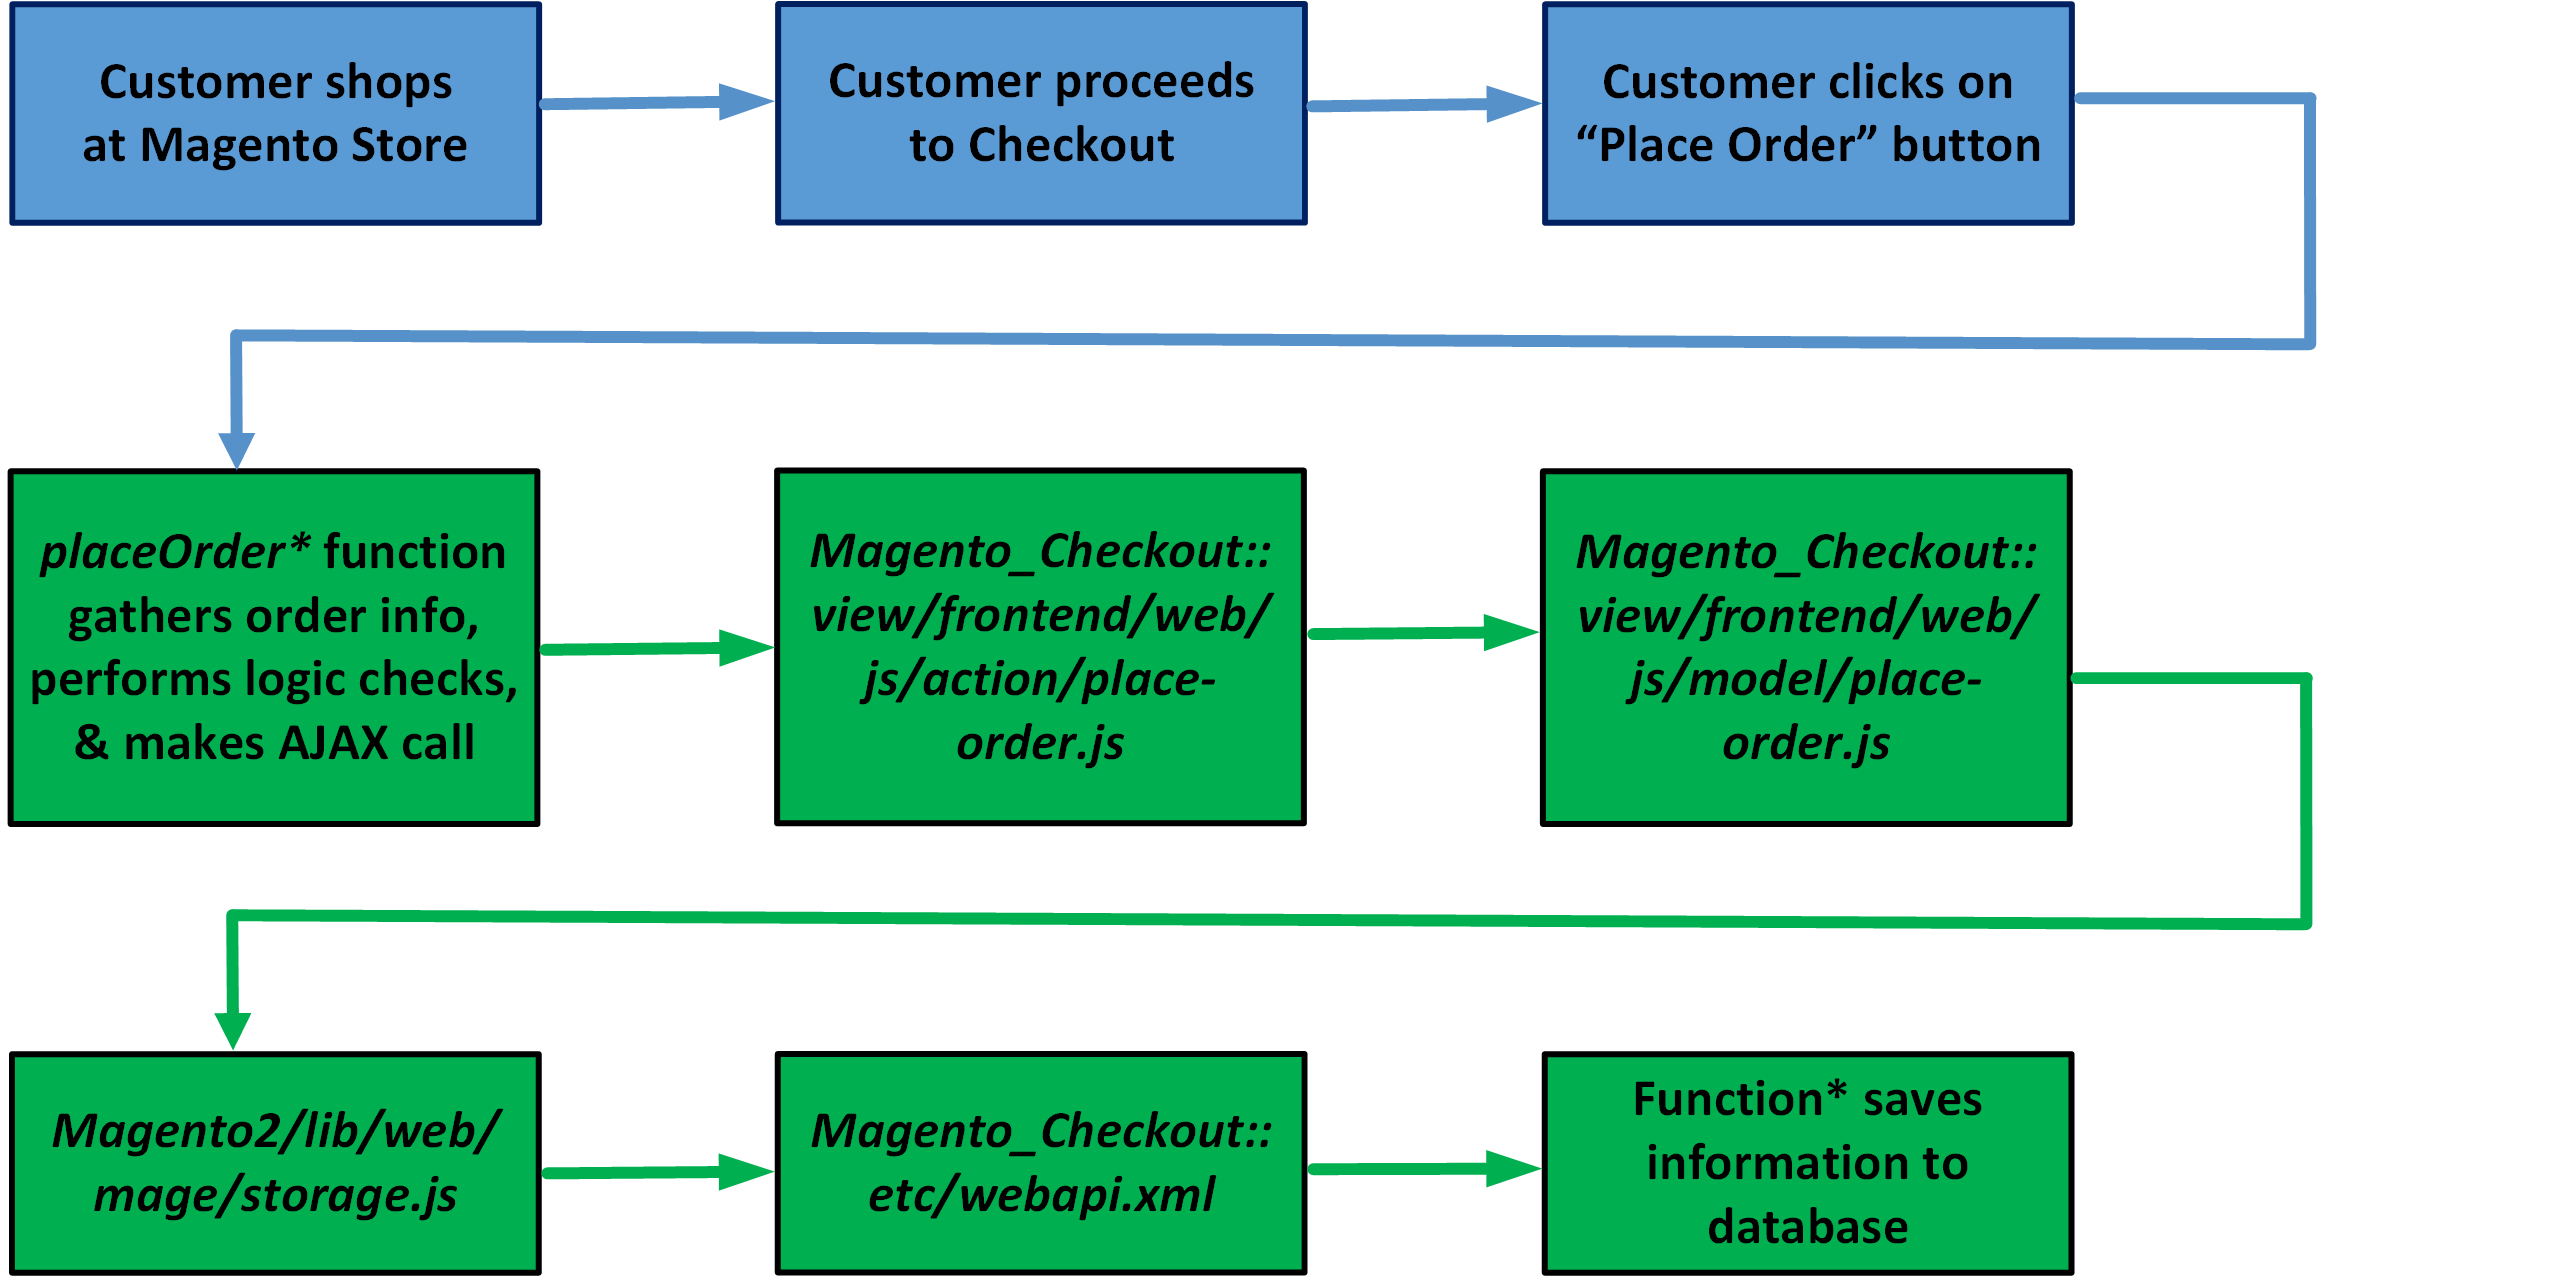 Demonstrates shopping checkout workflow and how information regarding it is saved to the Magento database.